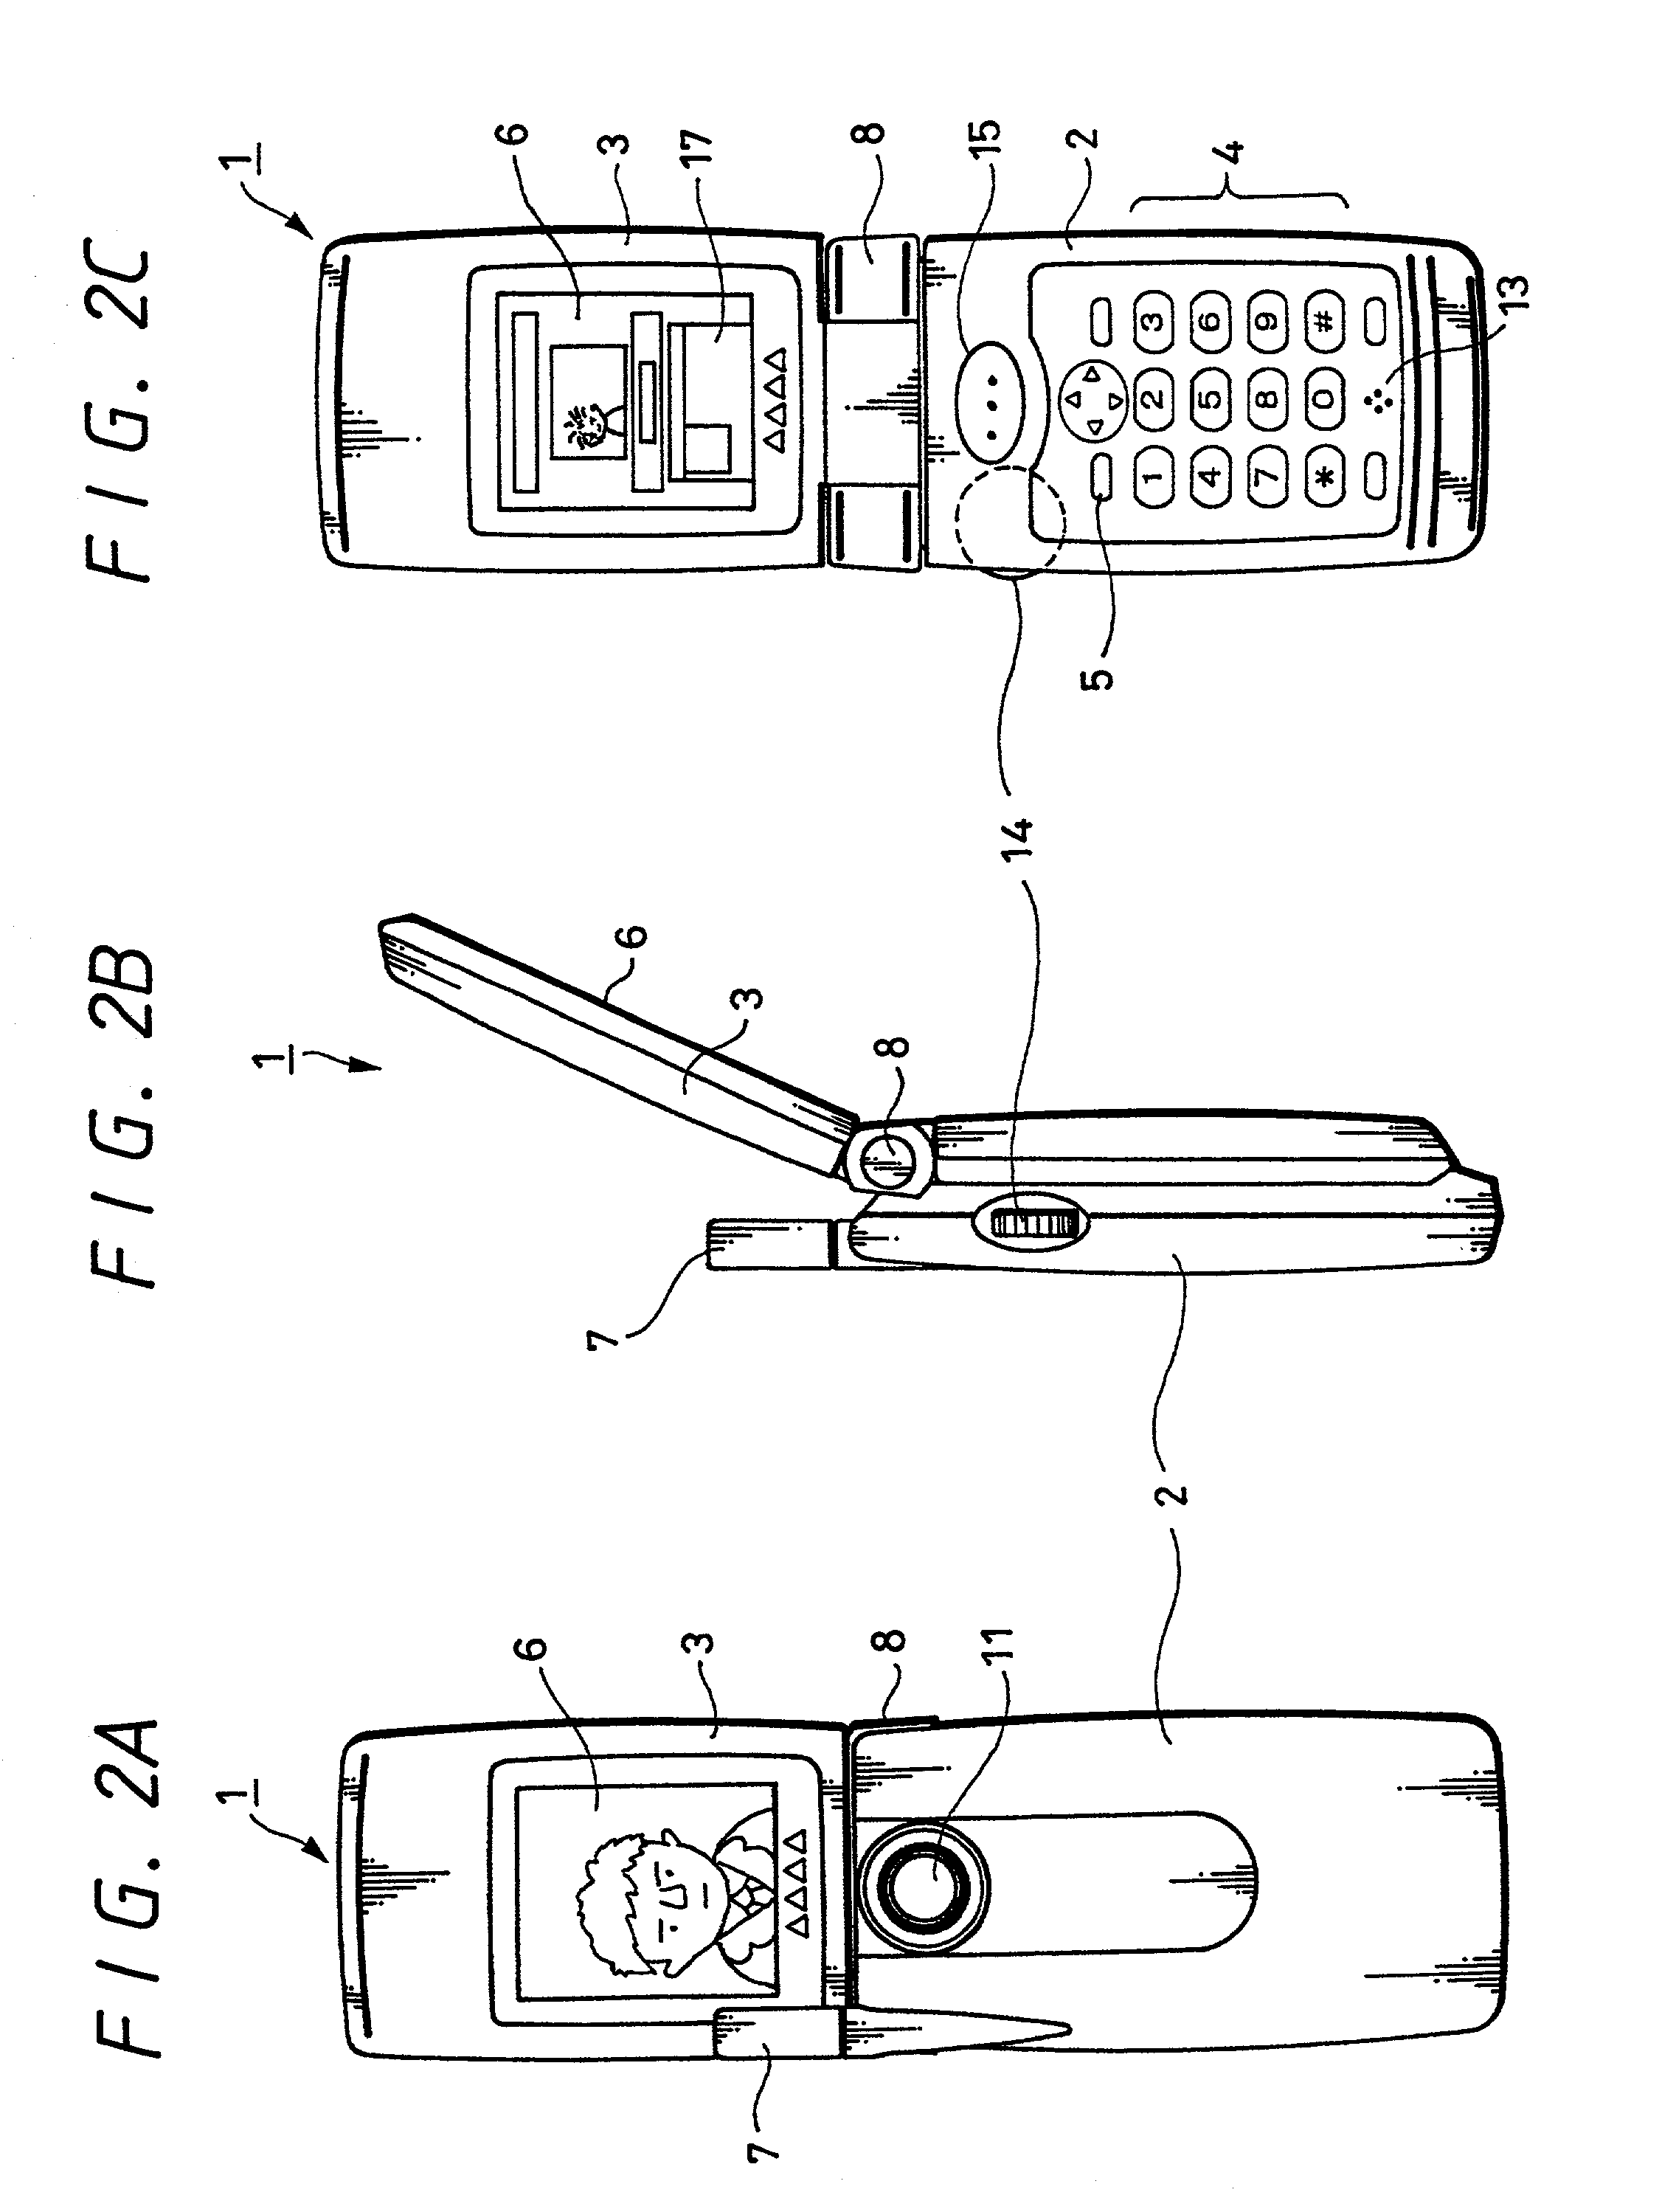 Telephone and camera with a bidirectionally rotatable lid having a display mounted thereon